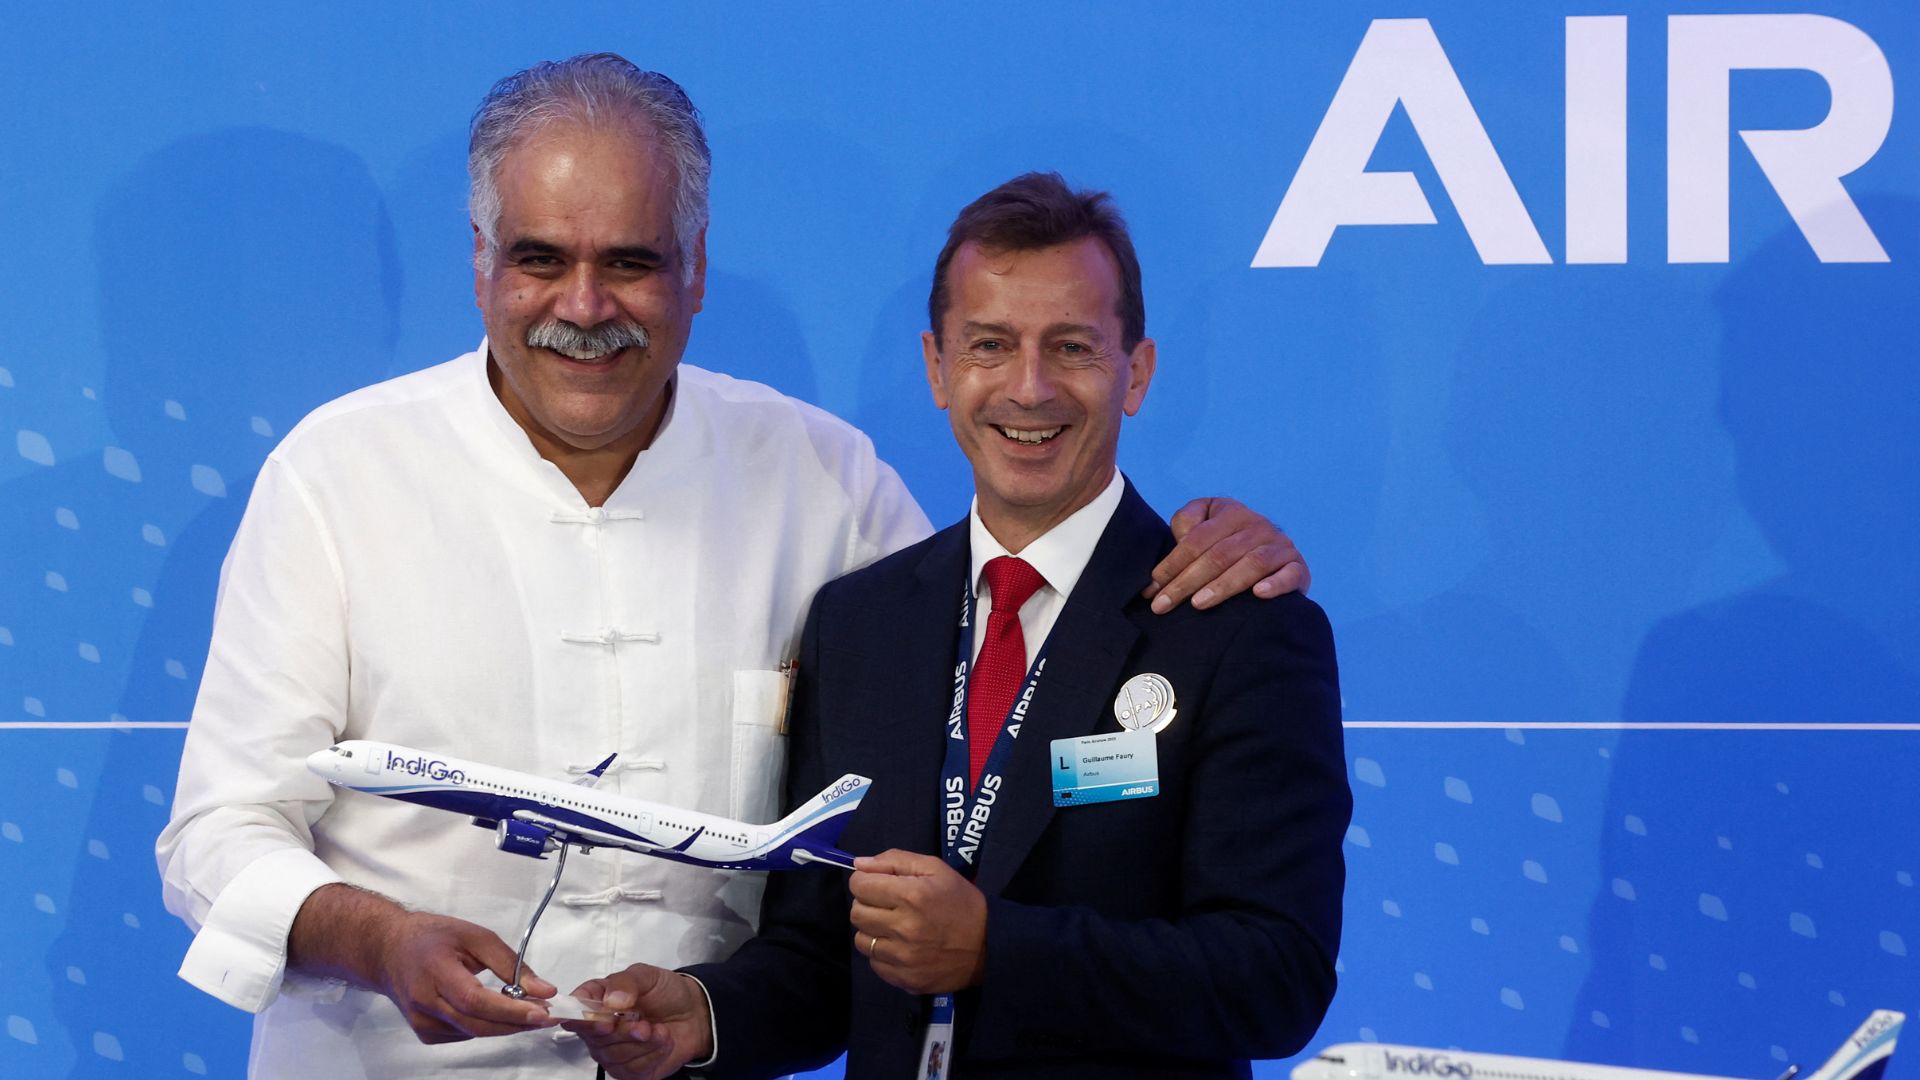 Rahul Bhatia, Managing Director of IndiGo and Guillaume Faury, CEO of Airbus, celebrate the deal at the 54th International Paris Airshow. /Benoit Tessier/Reuters